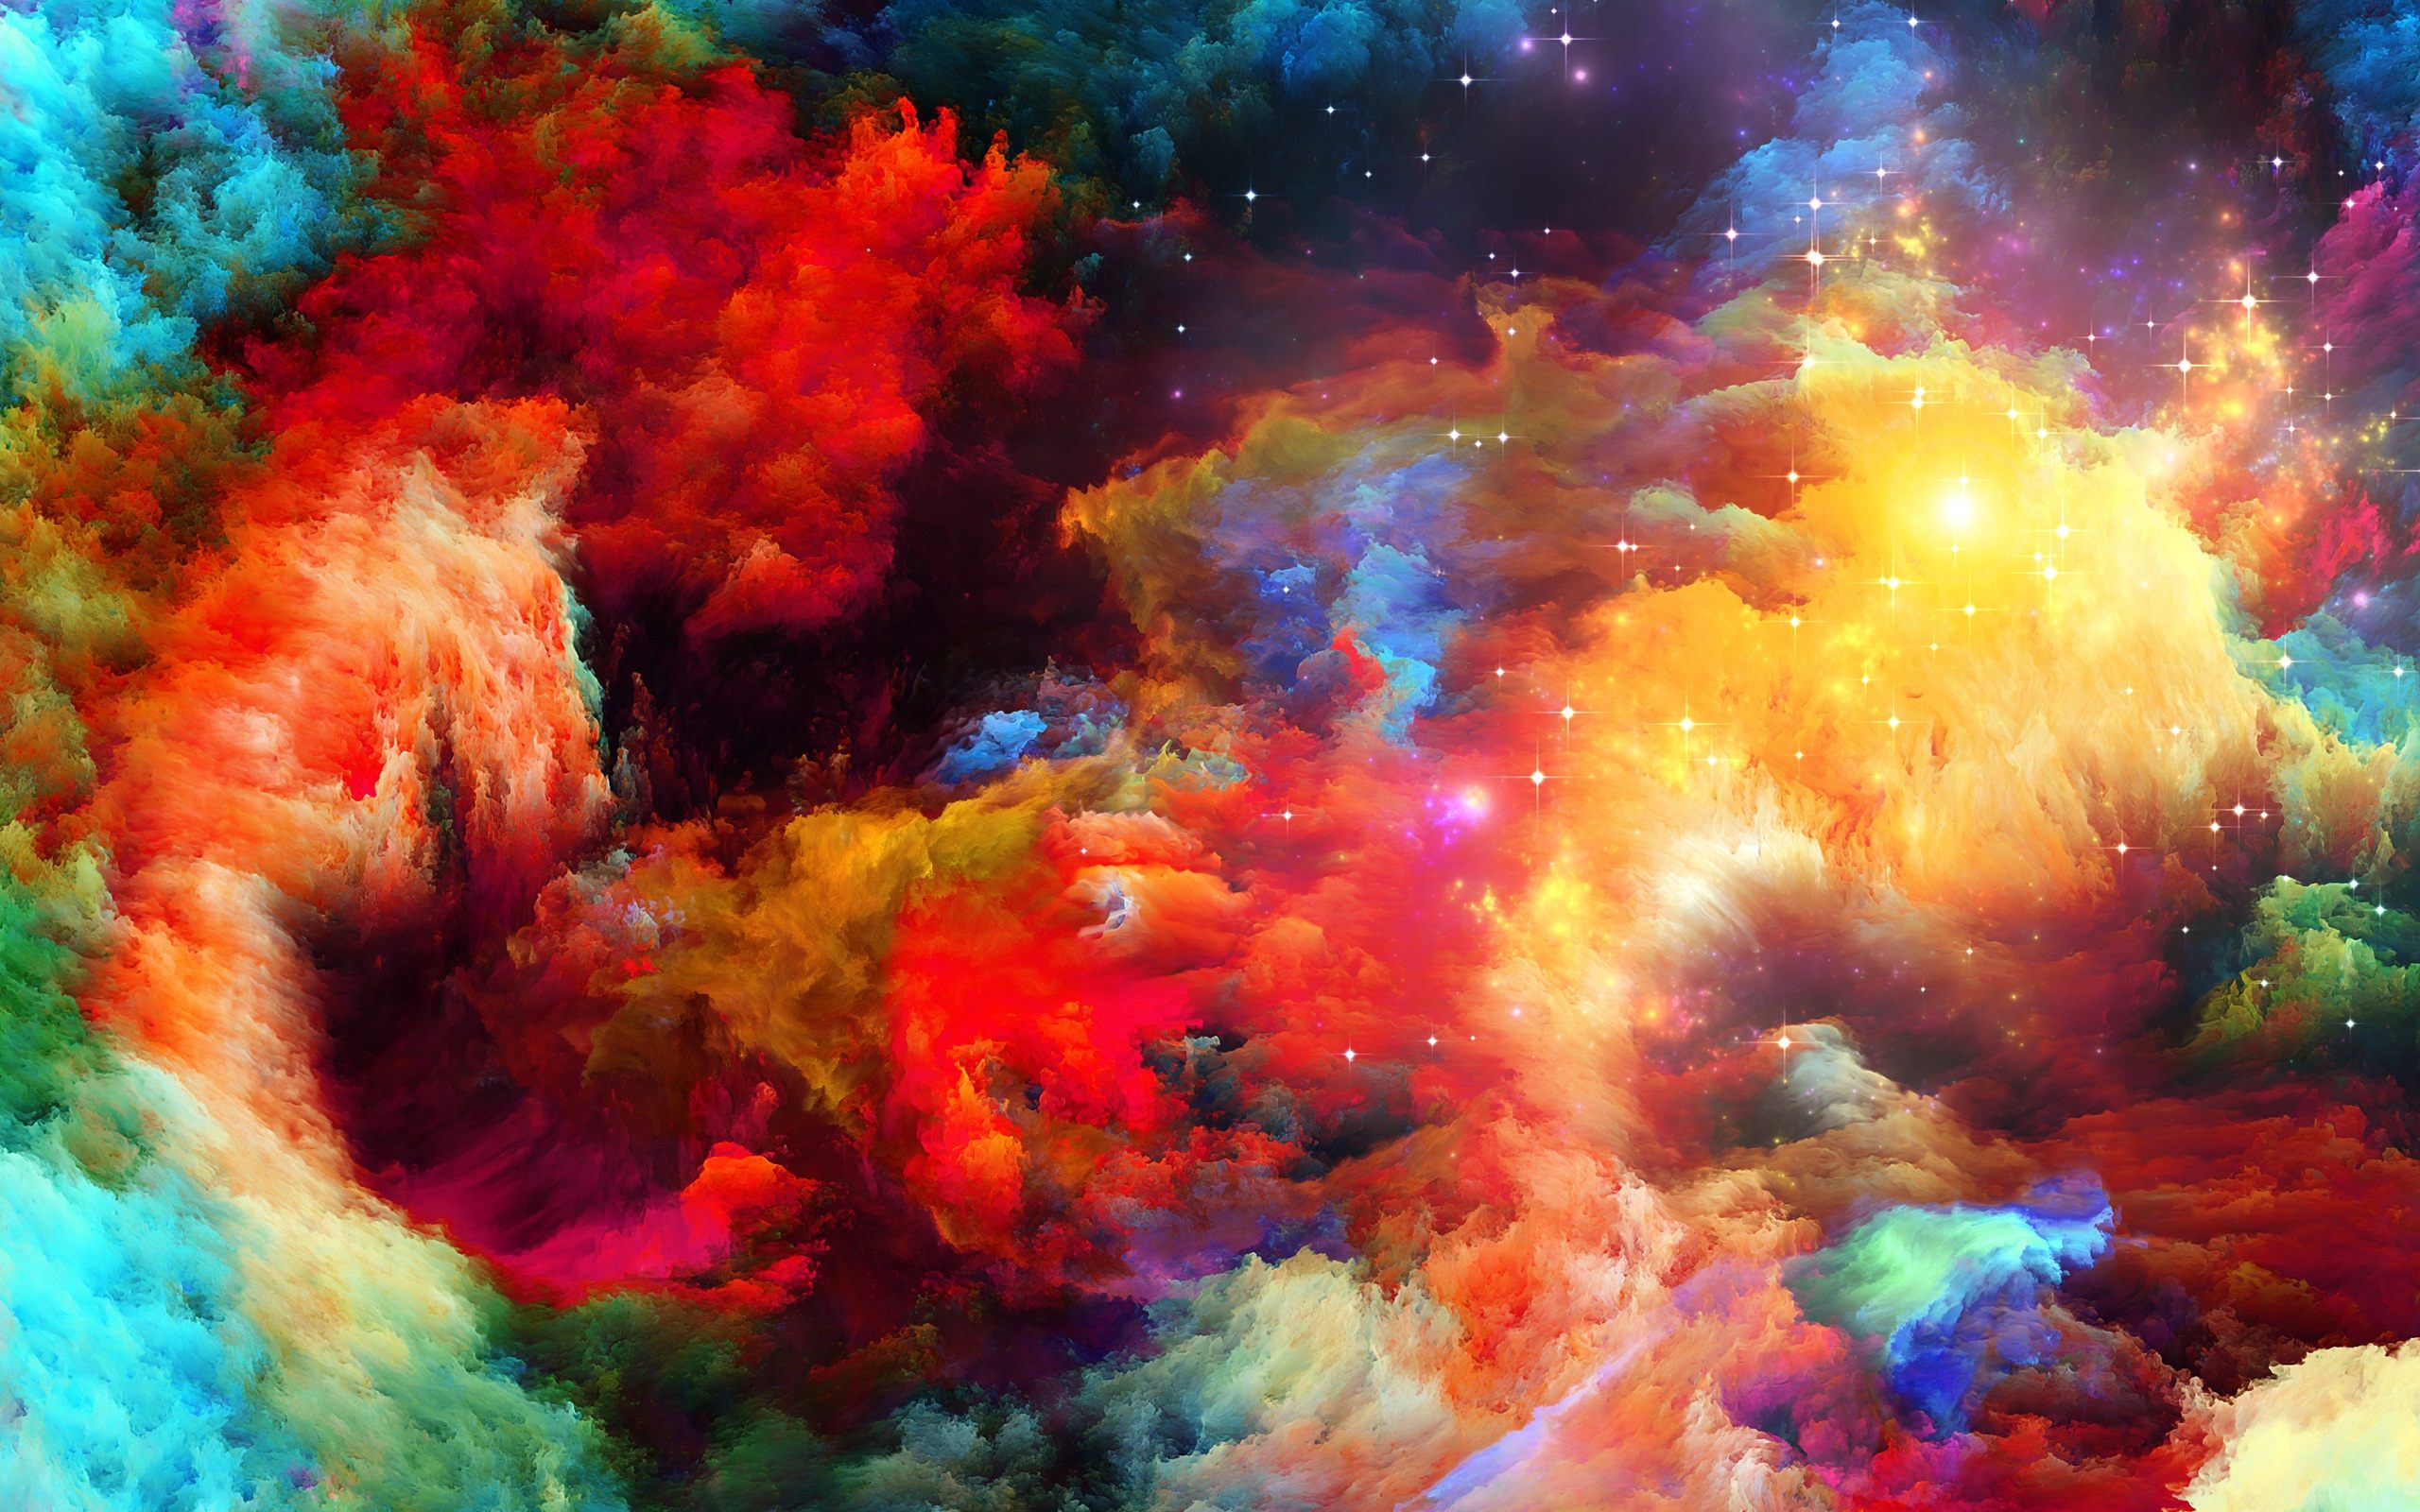 Abstract Rainbow Explosion Wallpaper Background 63037 2560x1600px